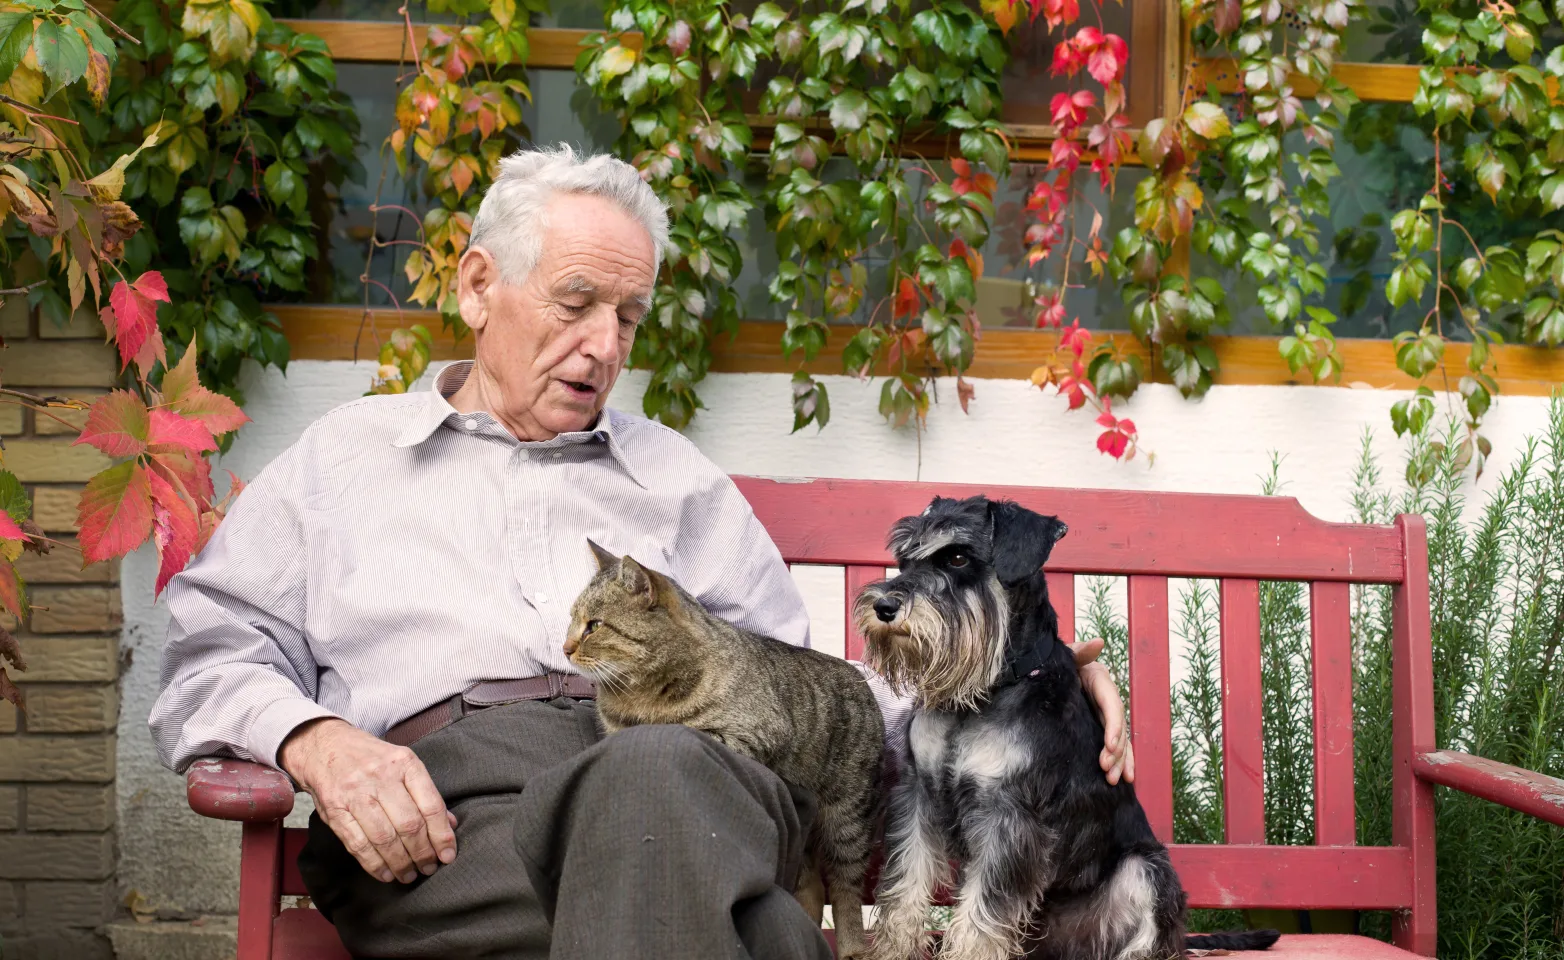 Old man on a bench petting a dog and cat